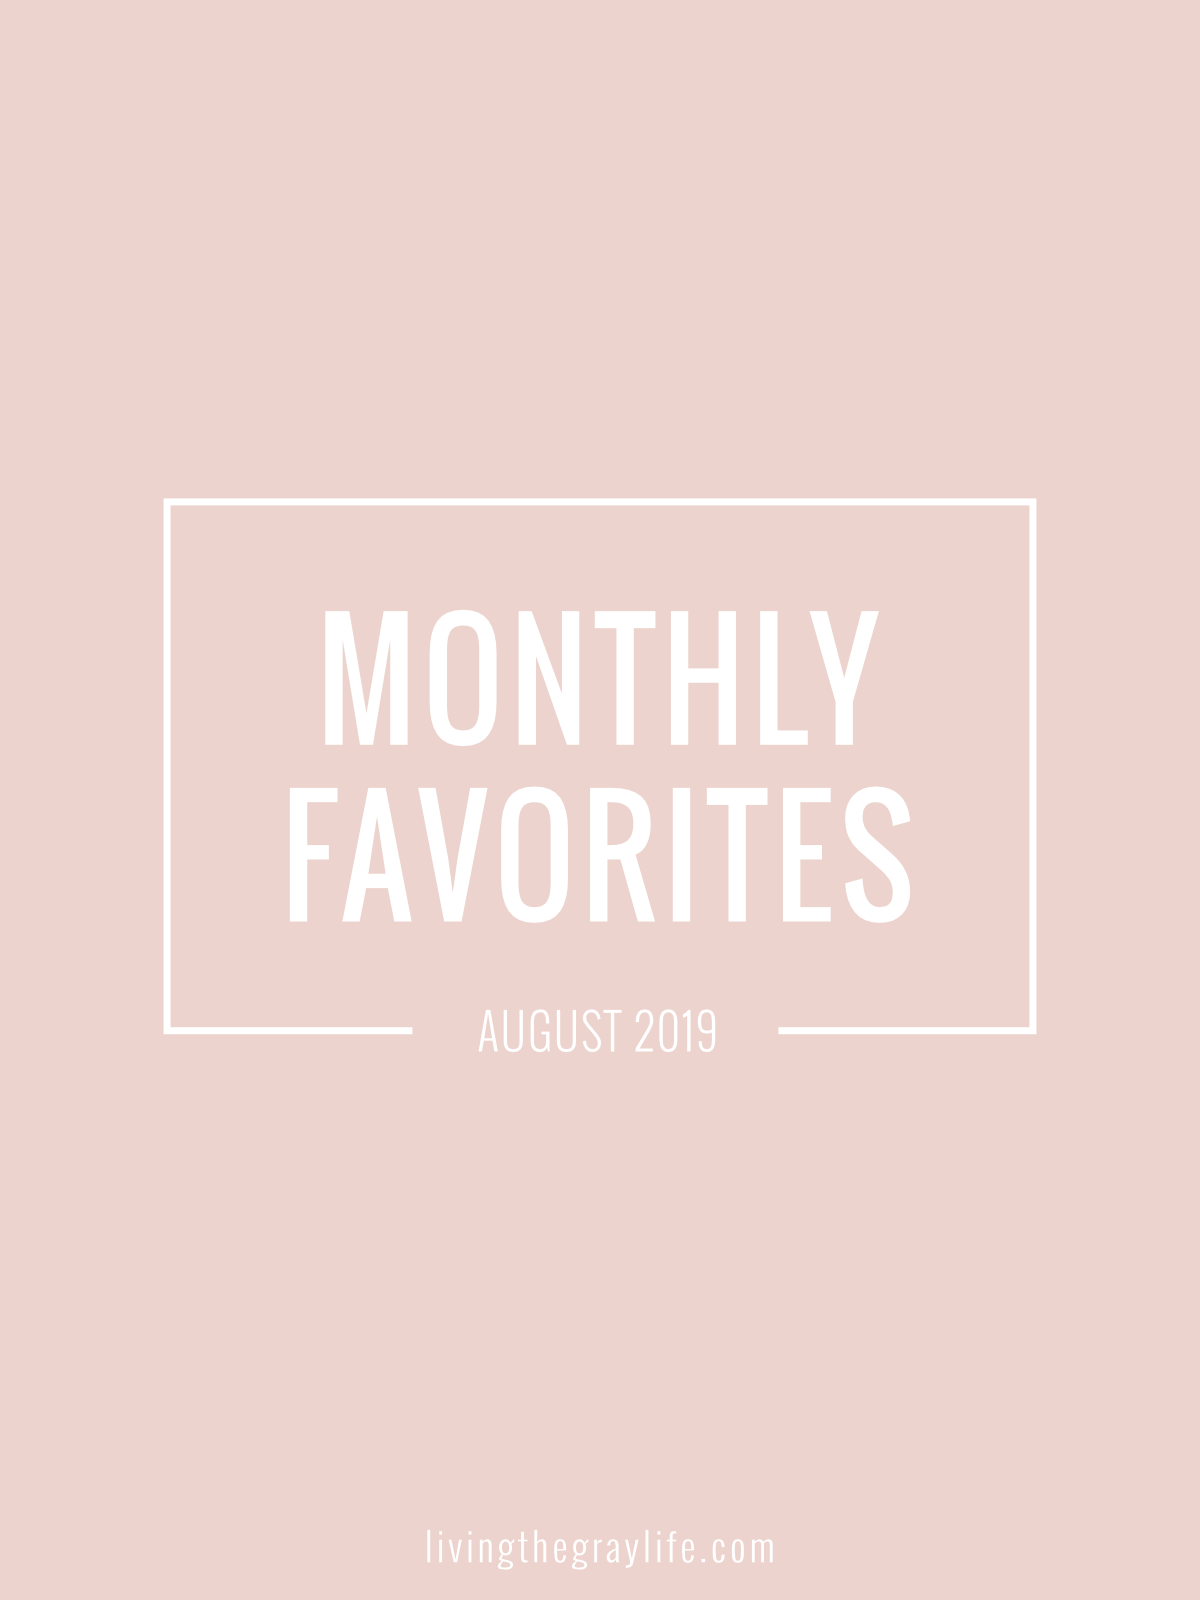 Monthly Favorites: August 2019